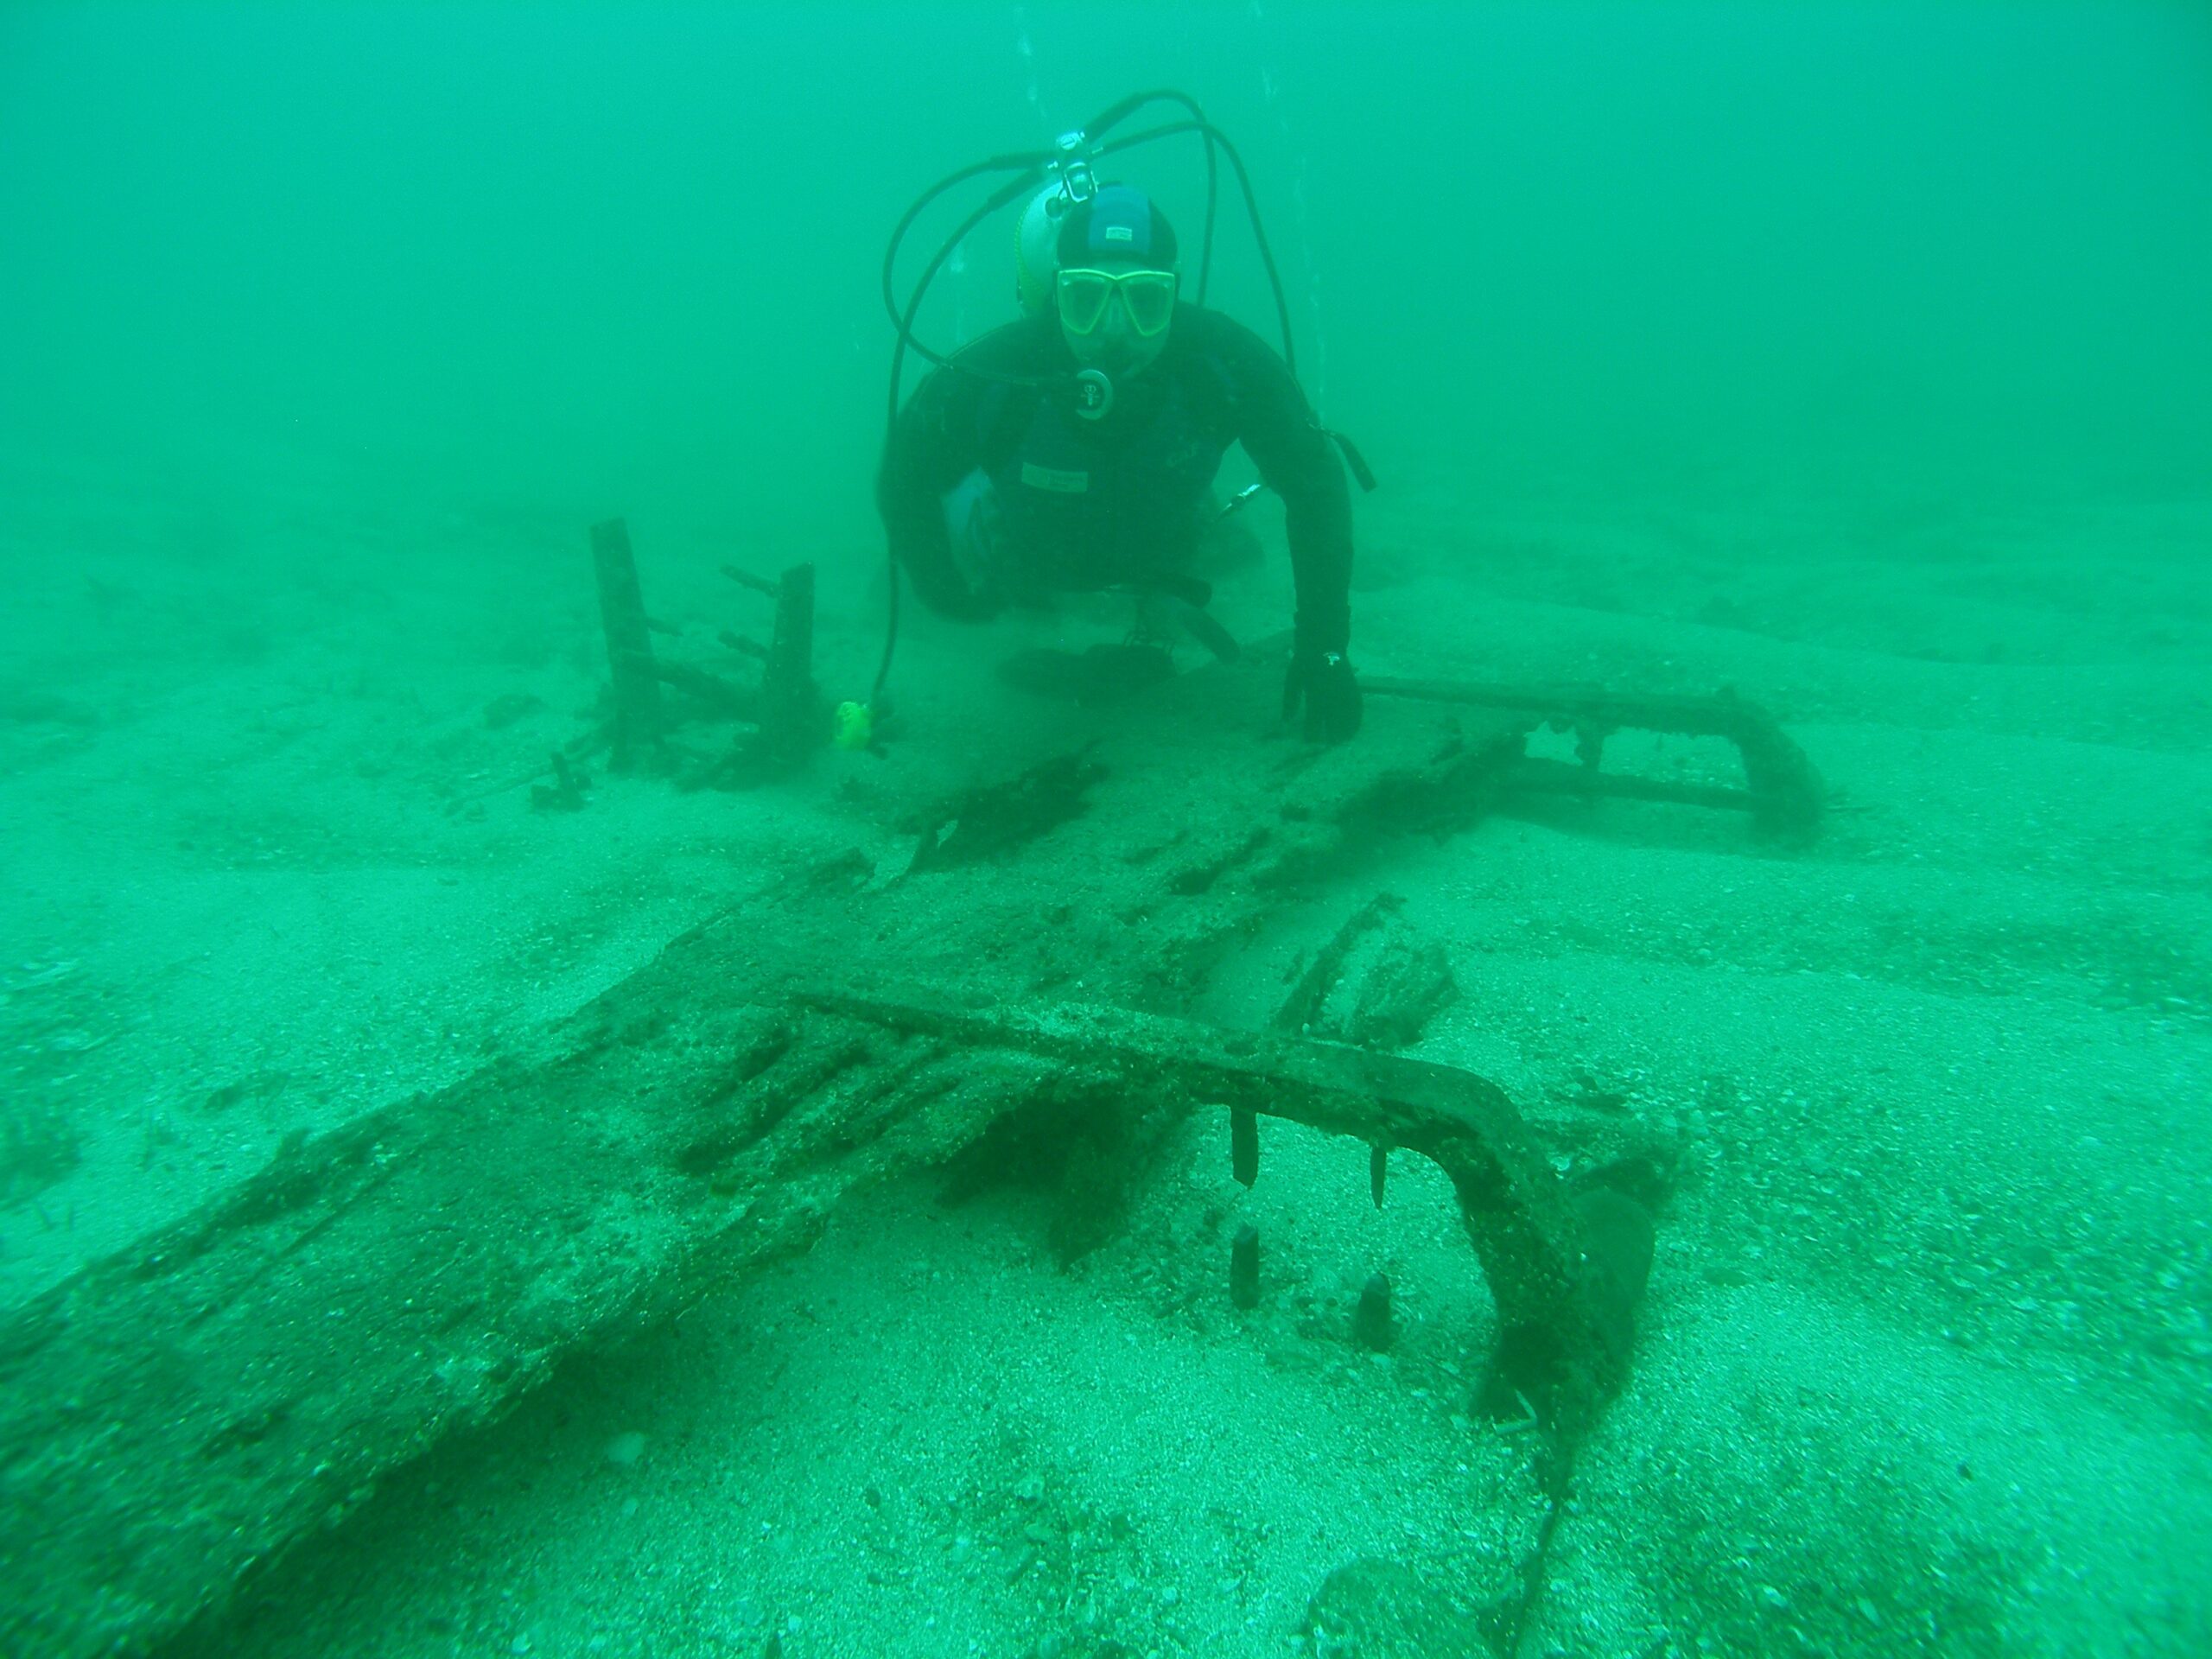 diver poses beside the Orpheus rudder resting on the sea floor.